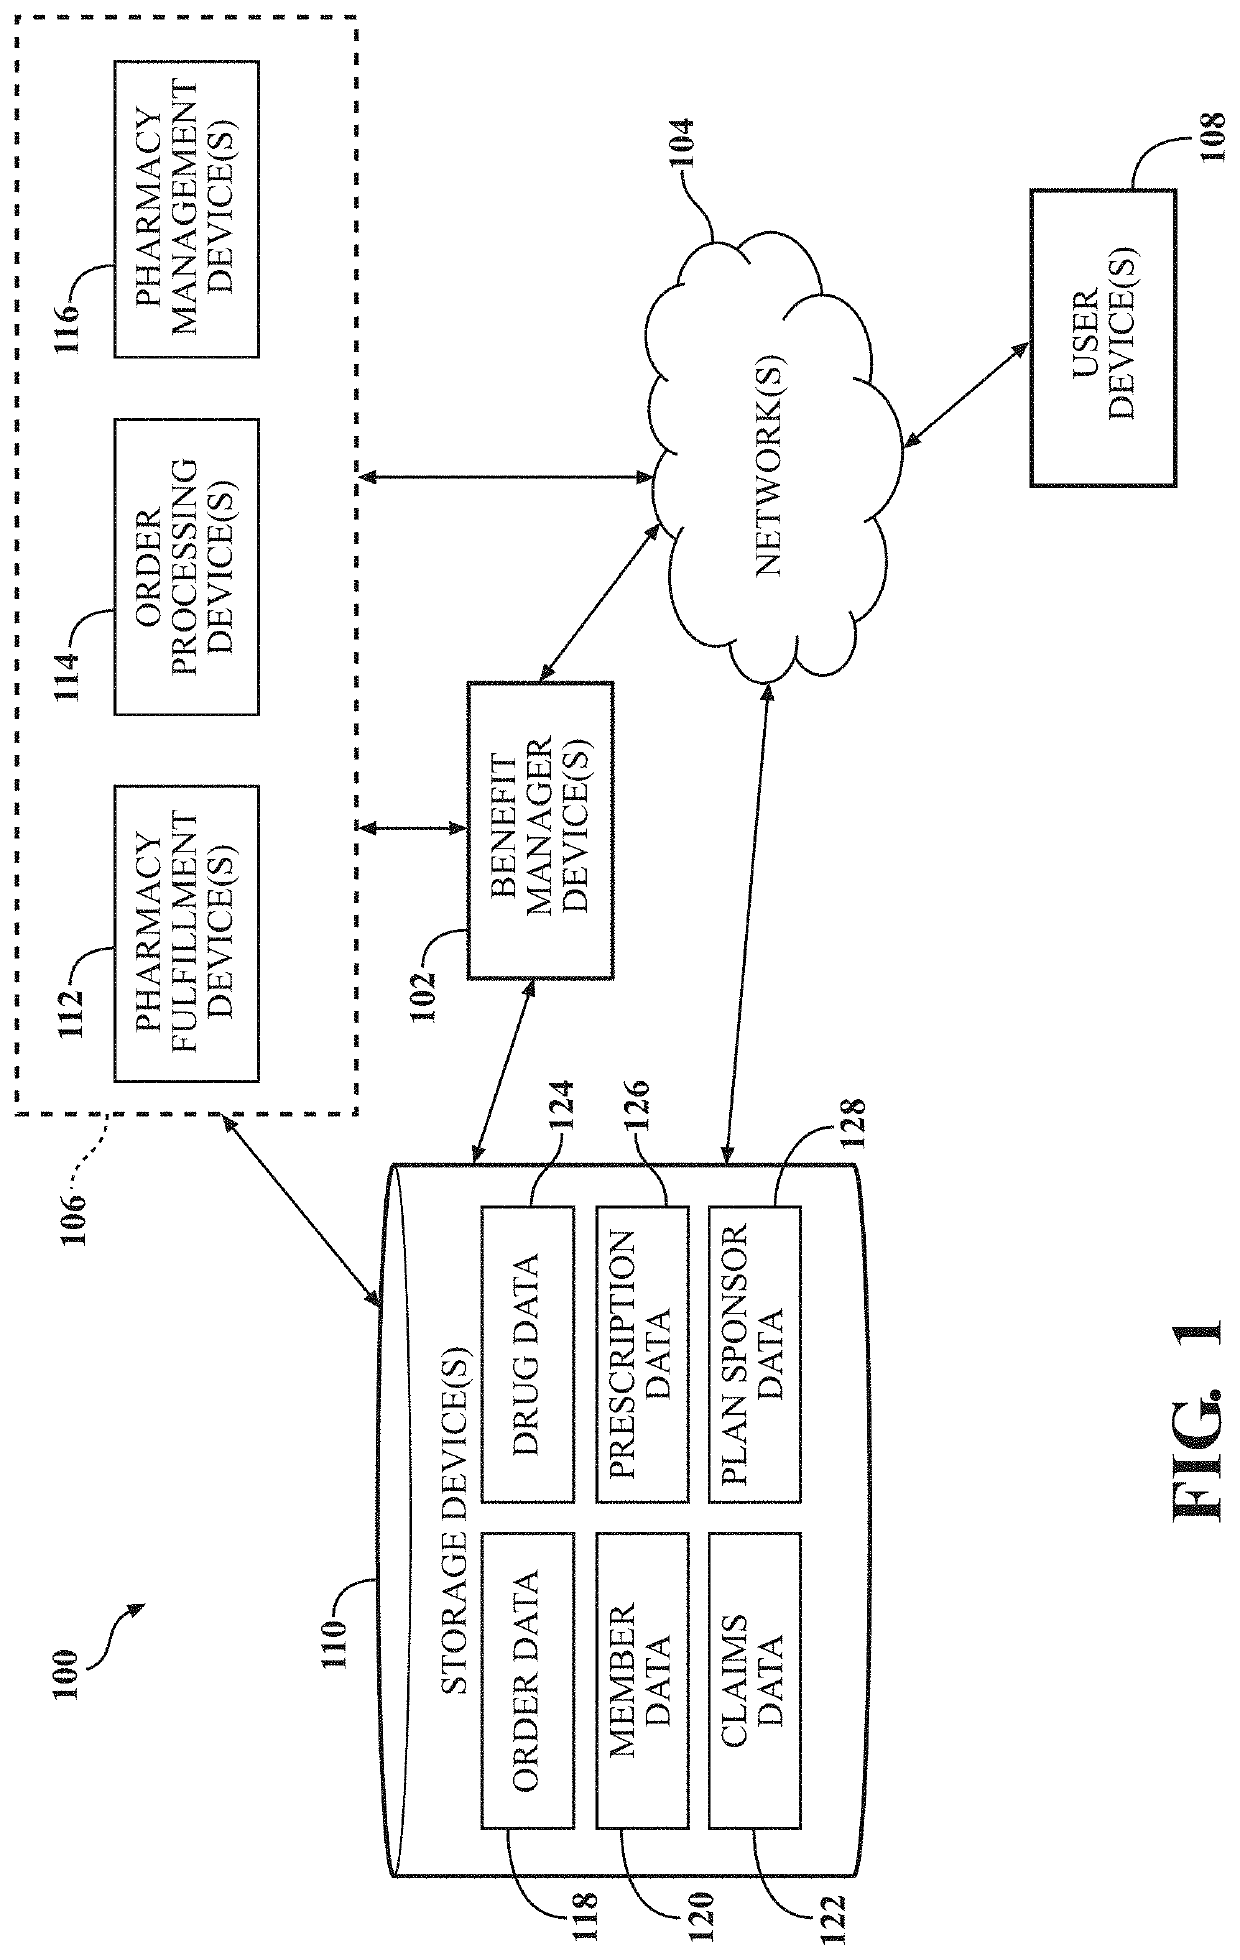 Imaging system for identifying medication containers